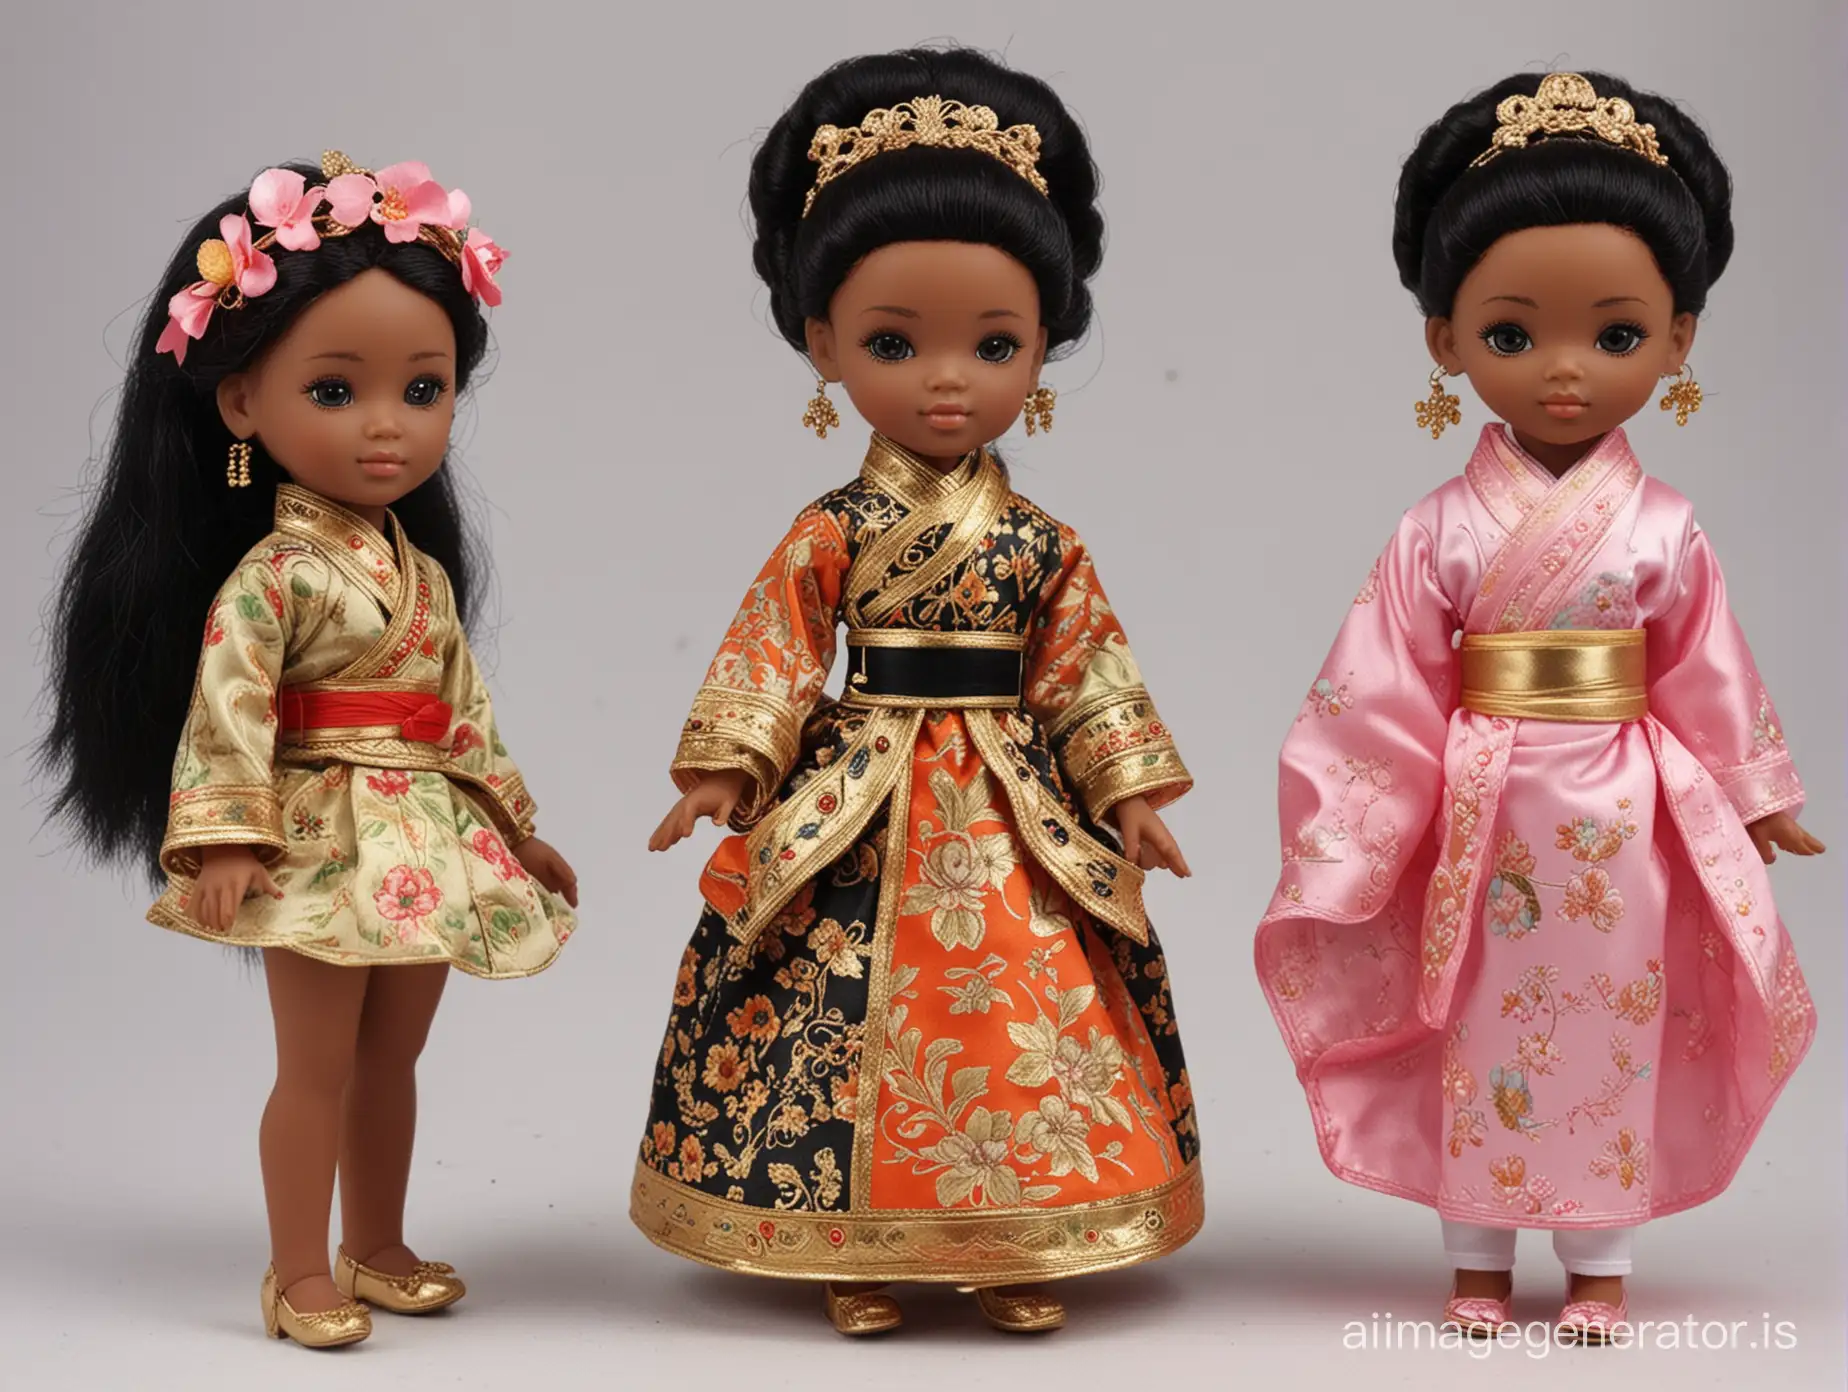 Diverse-Doll-Collection-Oriental-and-Black-Skinned-Dolls-Displayed-Together